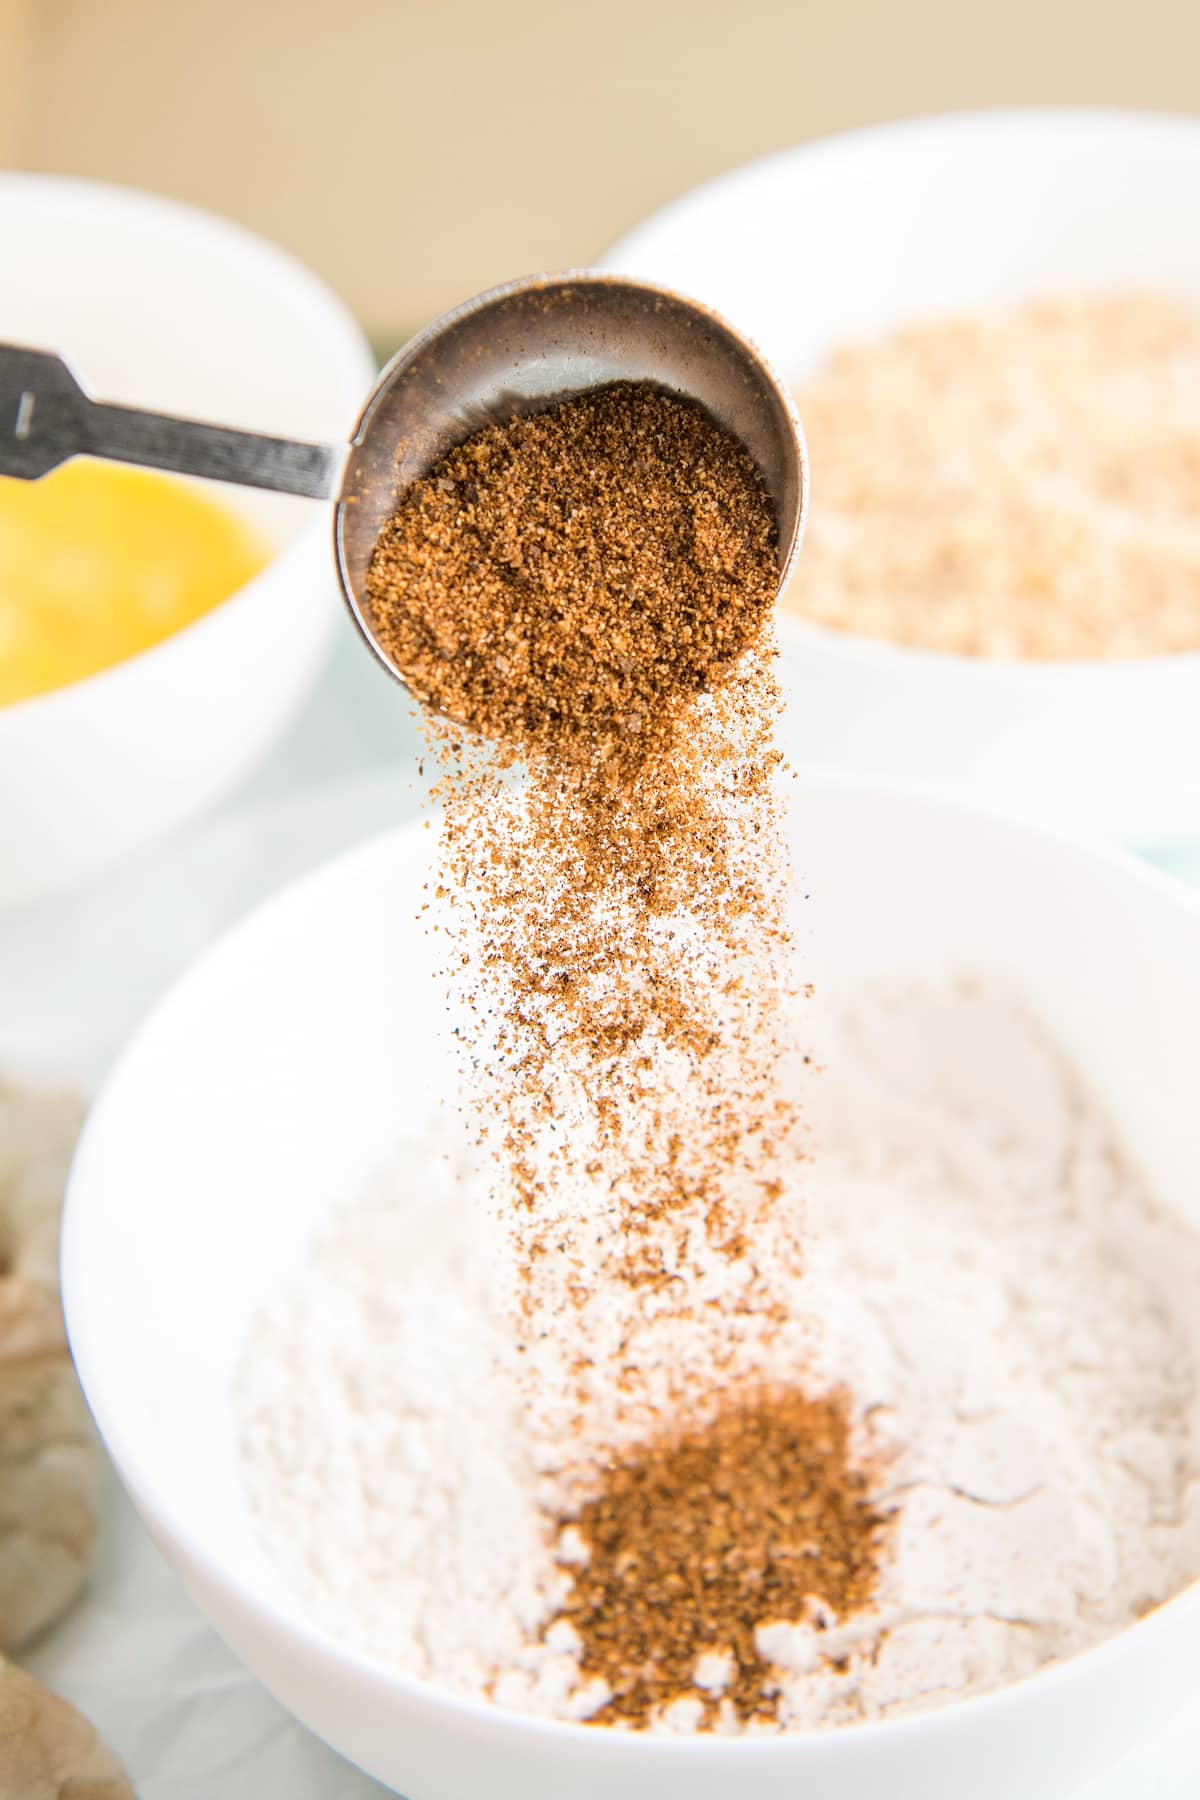 Cajun Seasoning being poured into a bowl of flour.